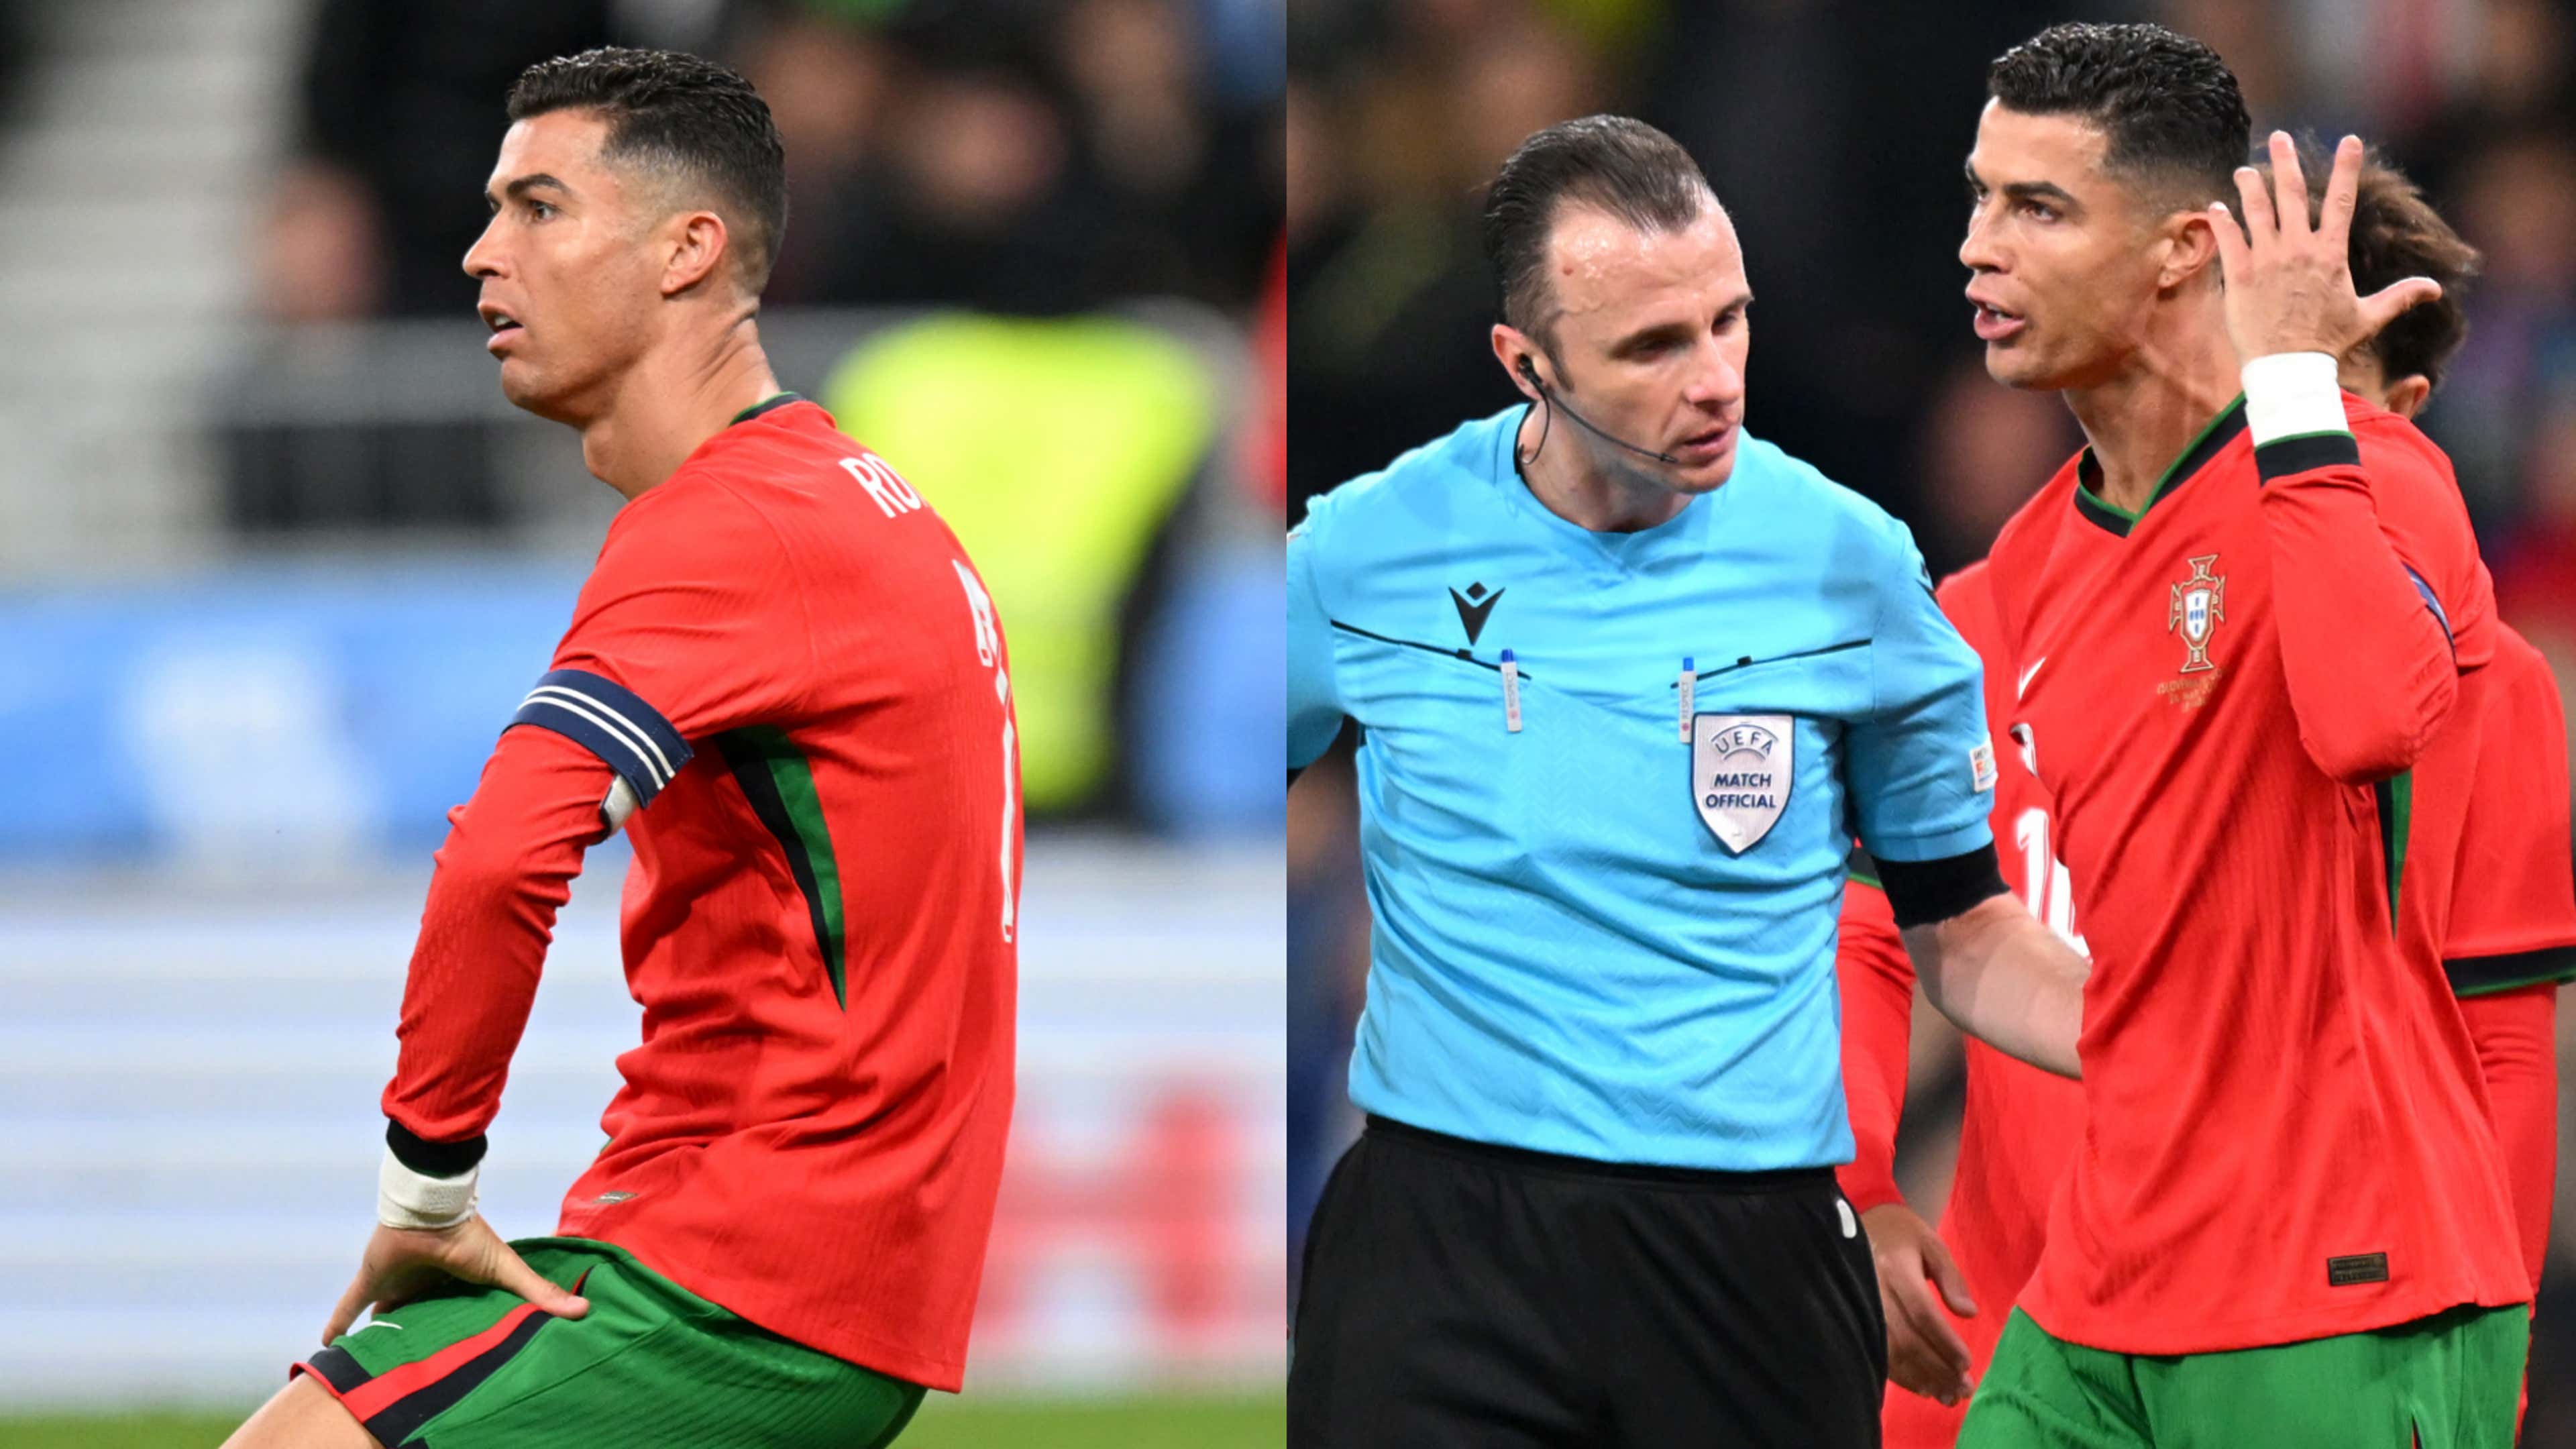 No penalty, no party!' - Fans accuse Cristiano Ronaldo of 'ghosting' for  Portugal and 'attacking referee' as he erupts with fury on way down tunnel  after Slovenia loss